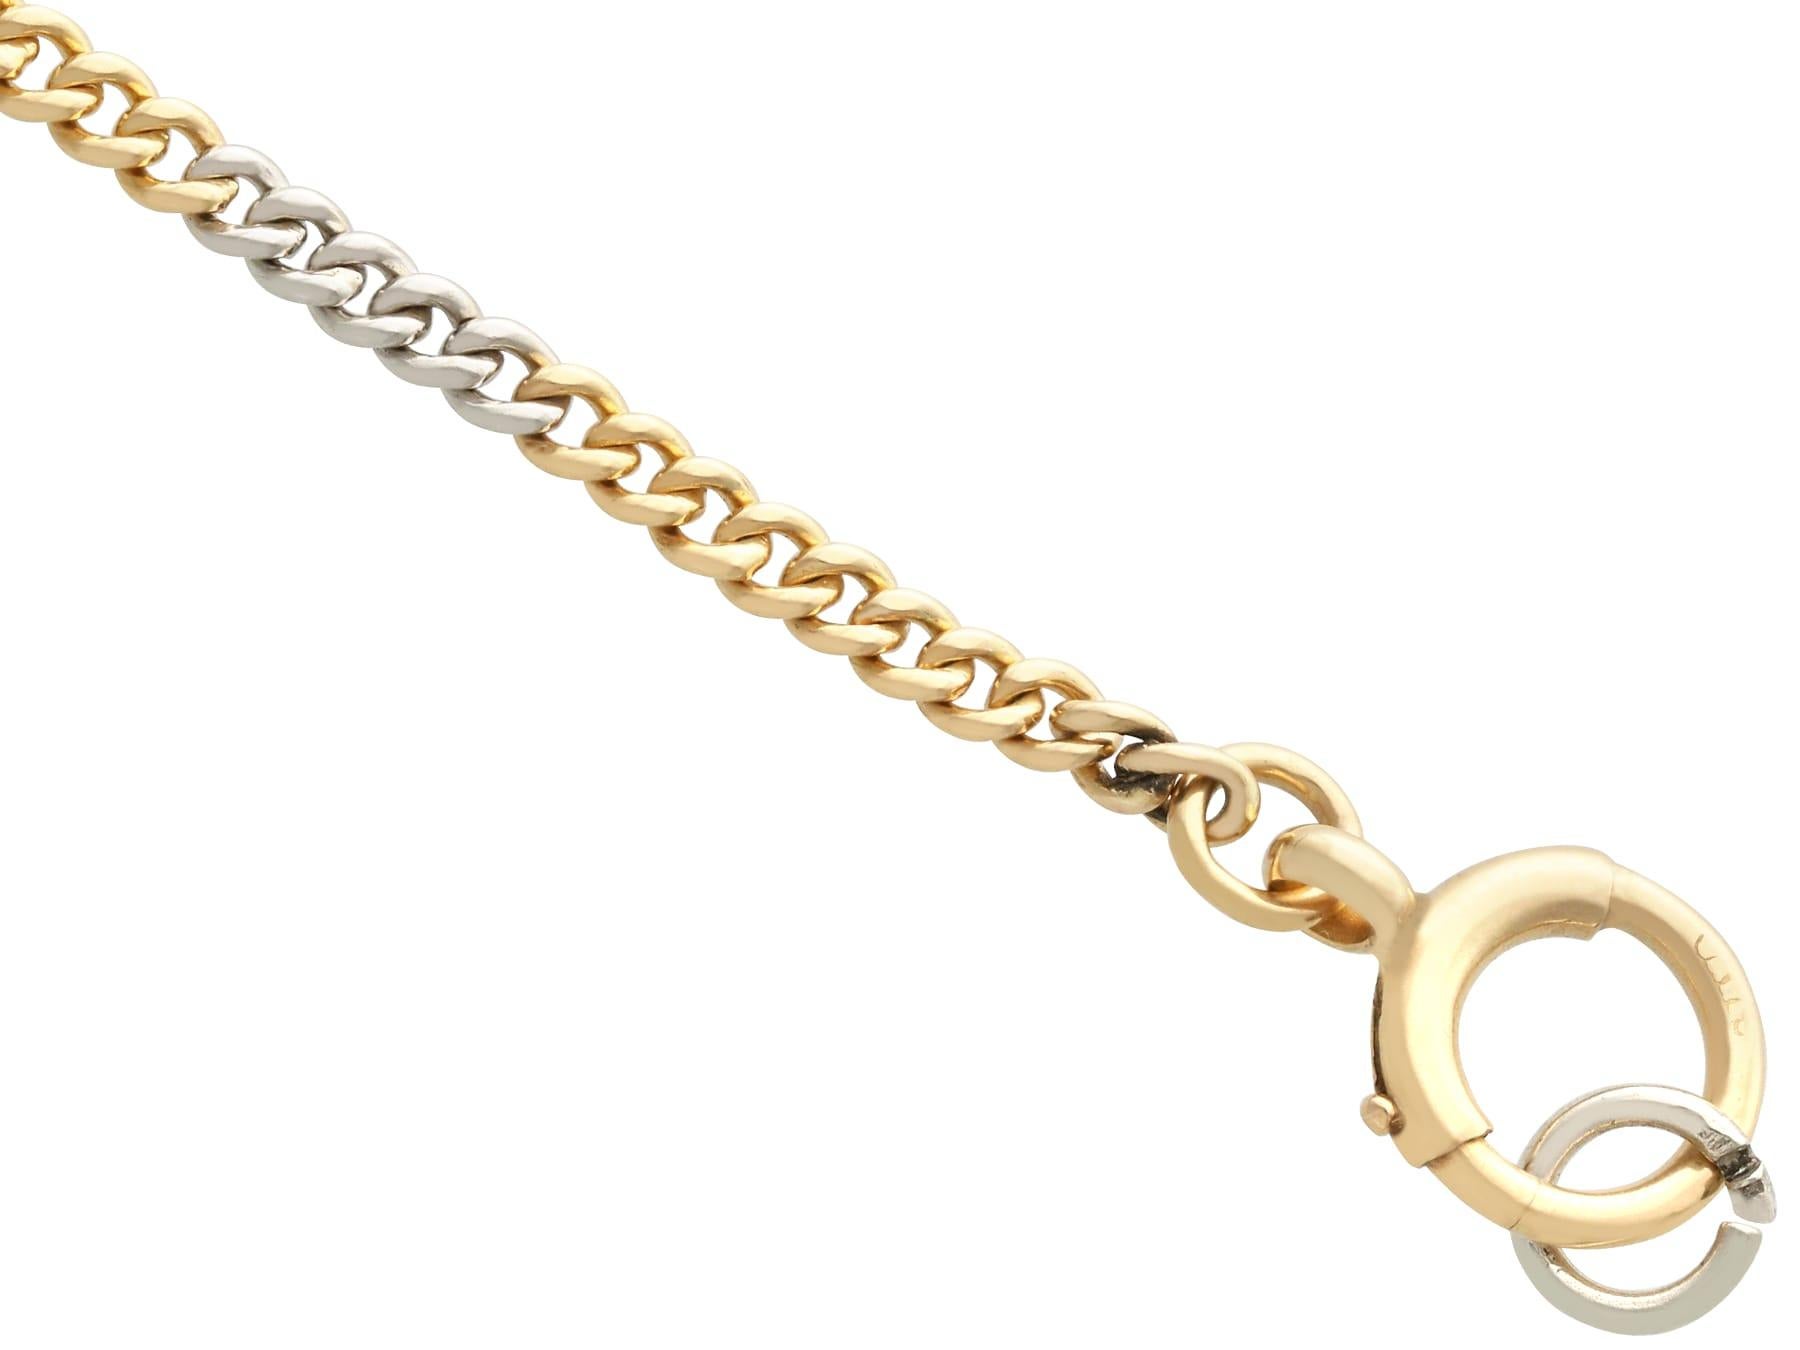 A fine and impressive antique 18 karat yellow gold and platinum ladies fob watch chain; part of our diverse antique chains collection.

This fine and impressive antique chain has been crafted in 18k yellow gold and platinum.

The chain consists of